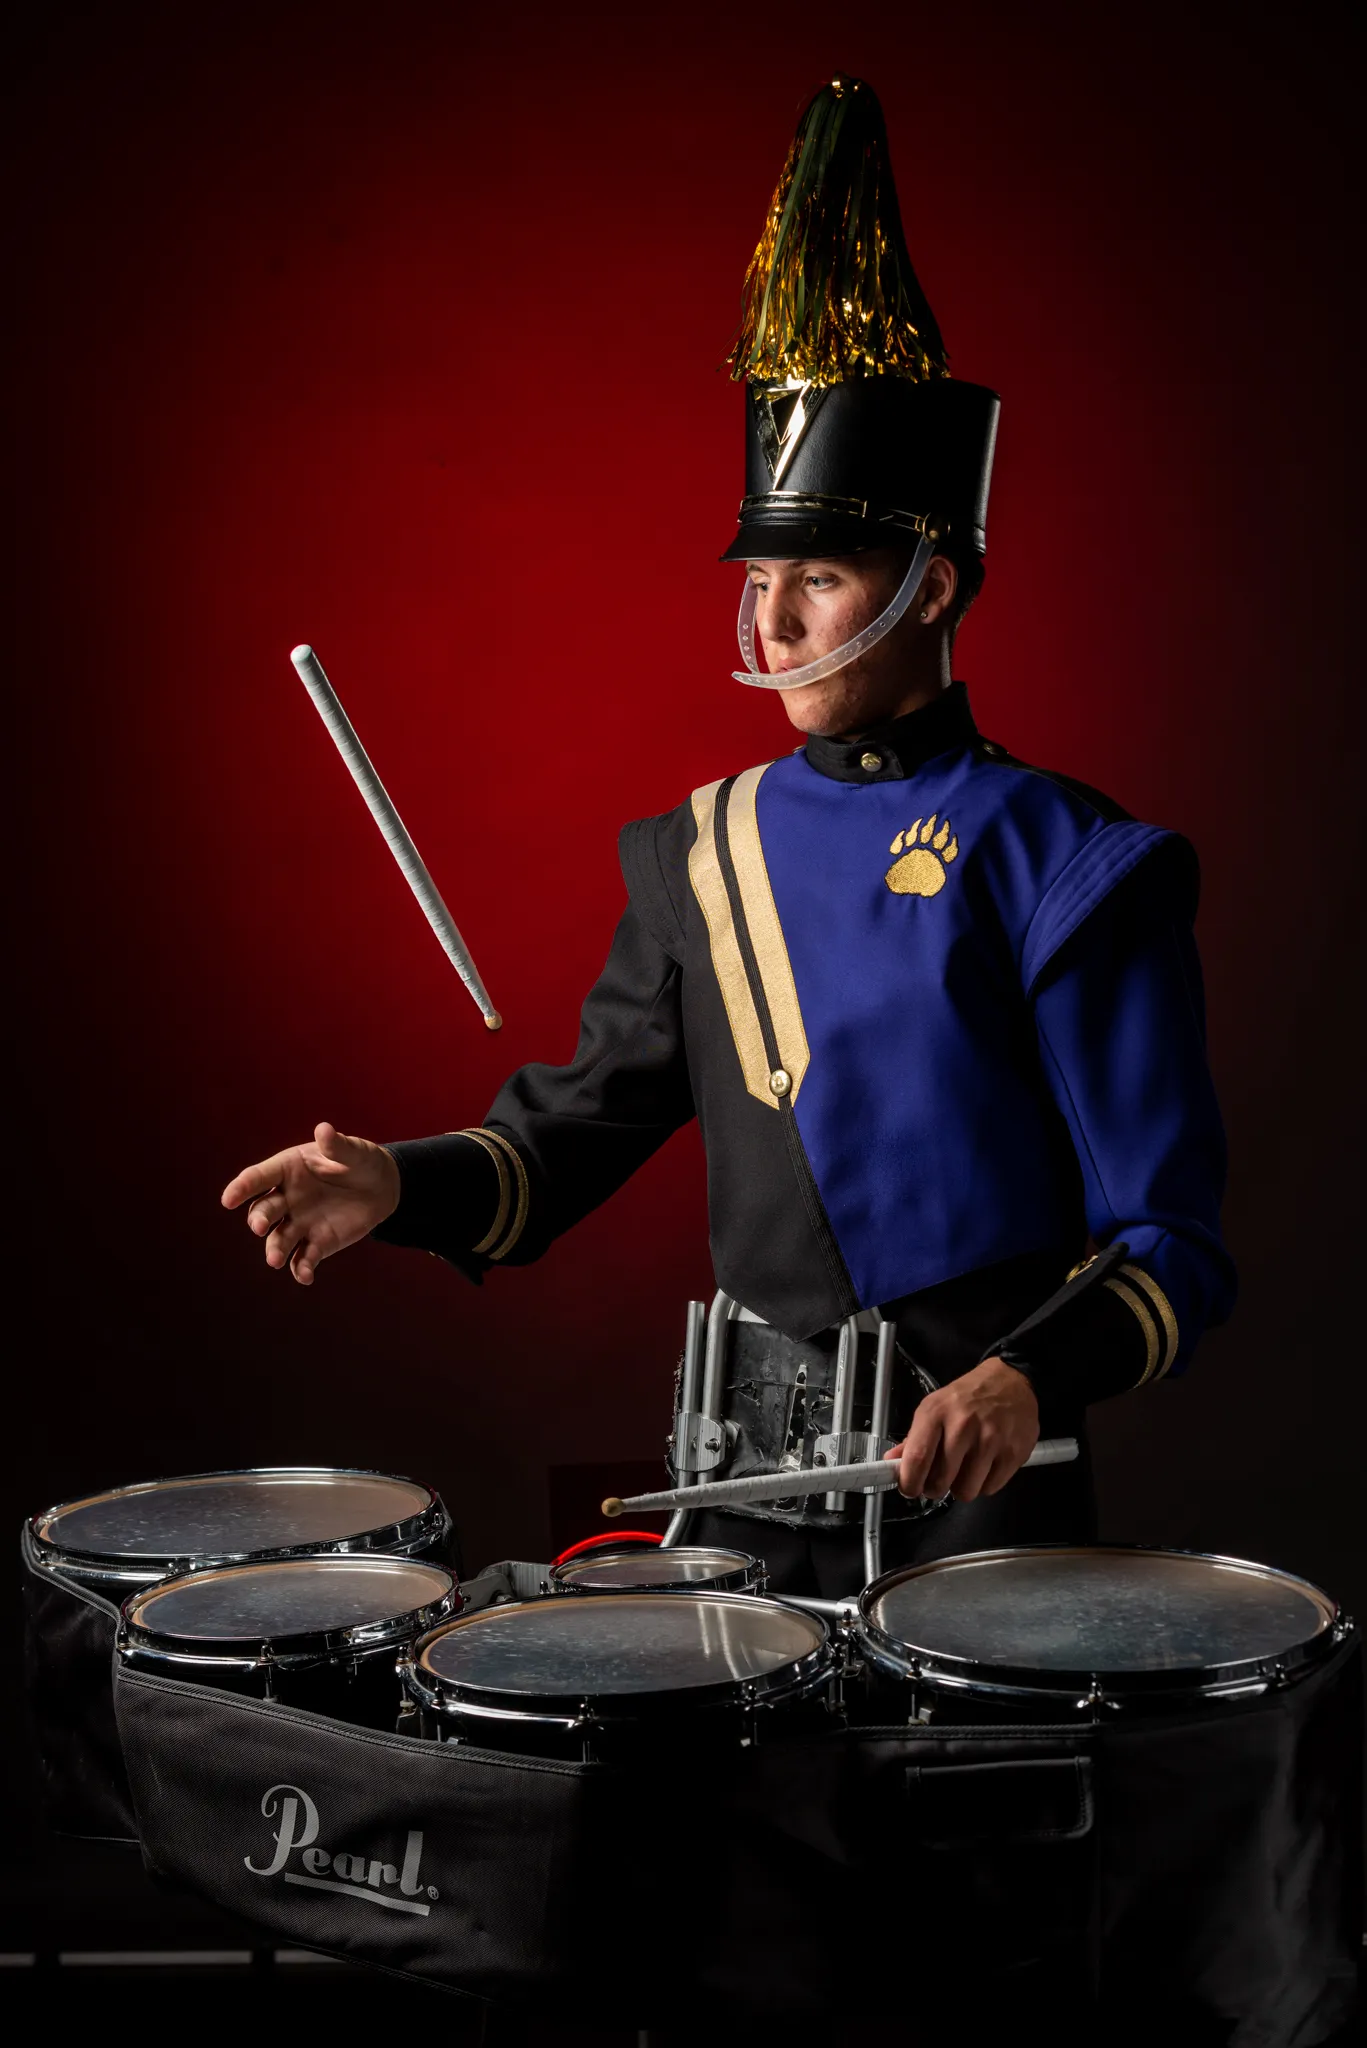 marching band member playing drum